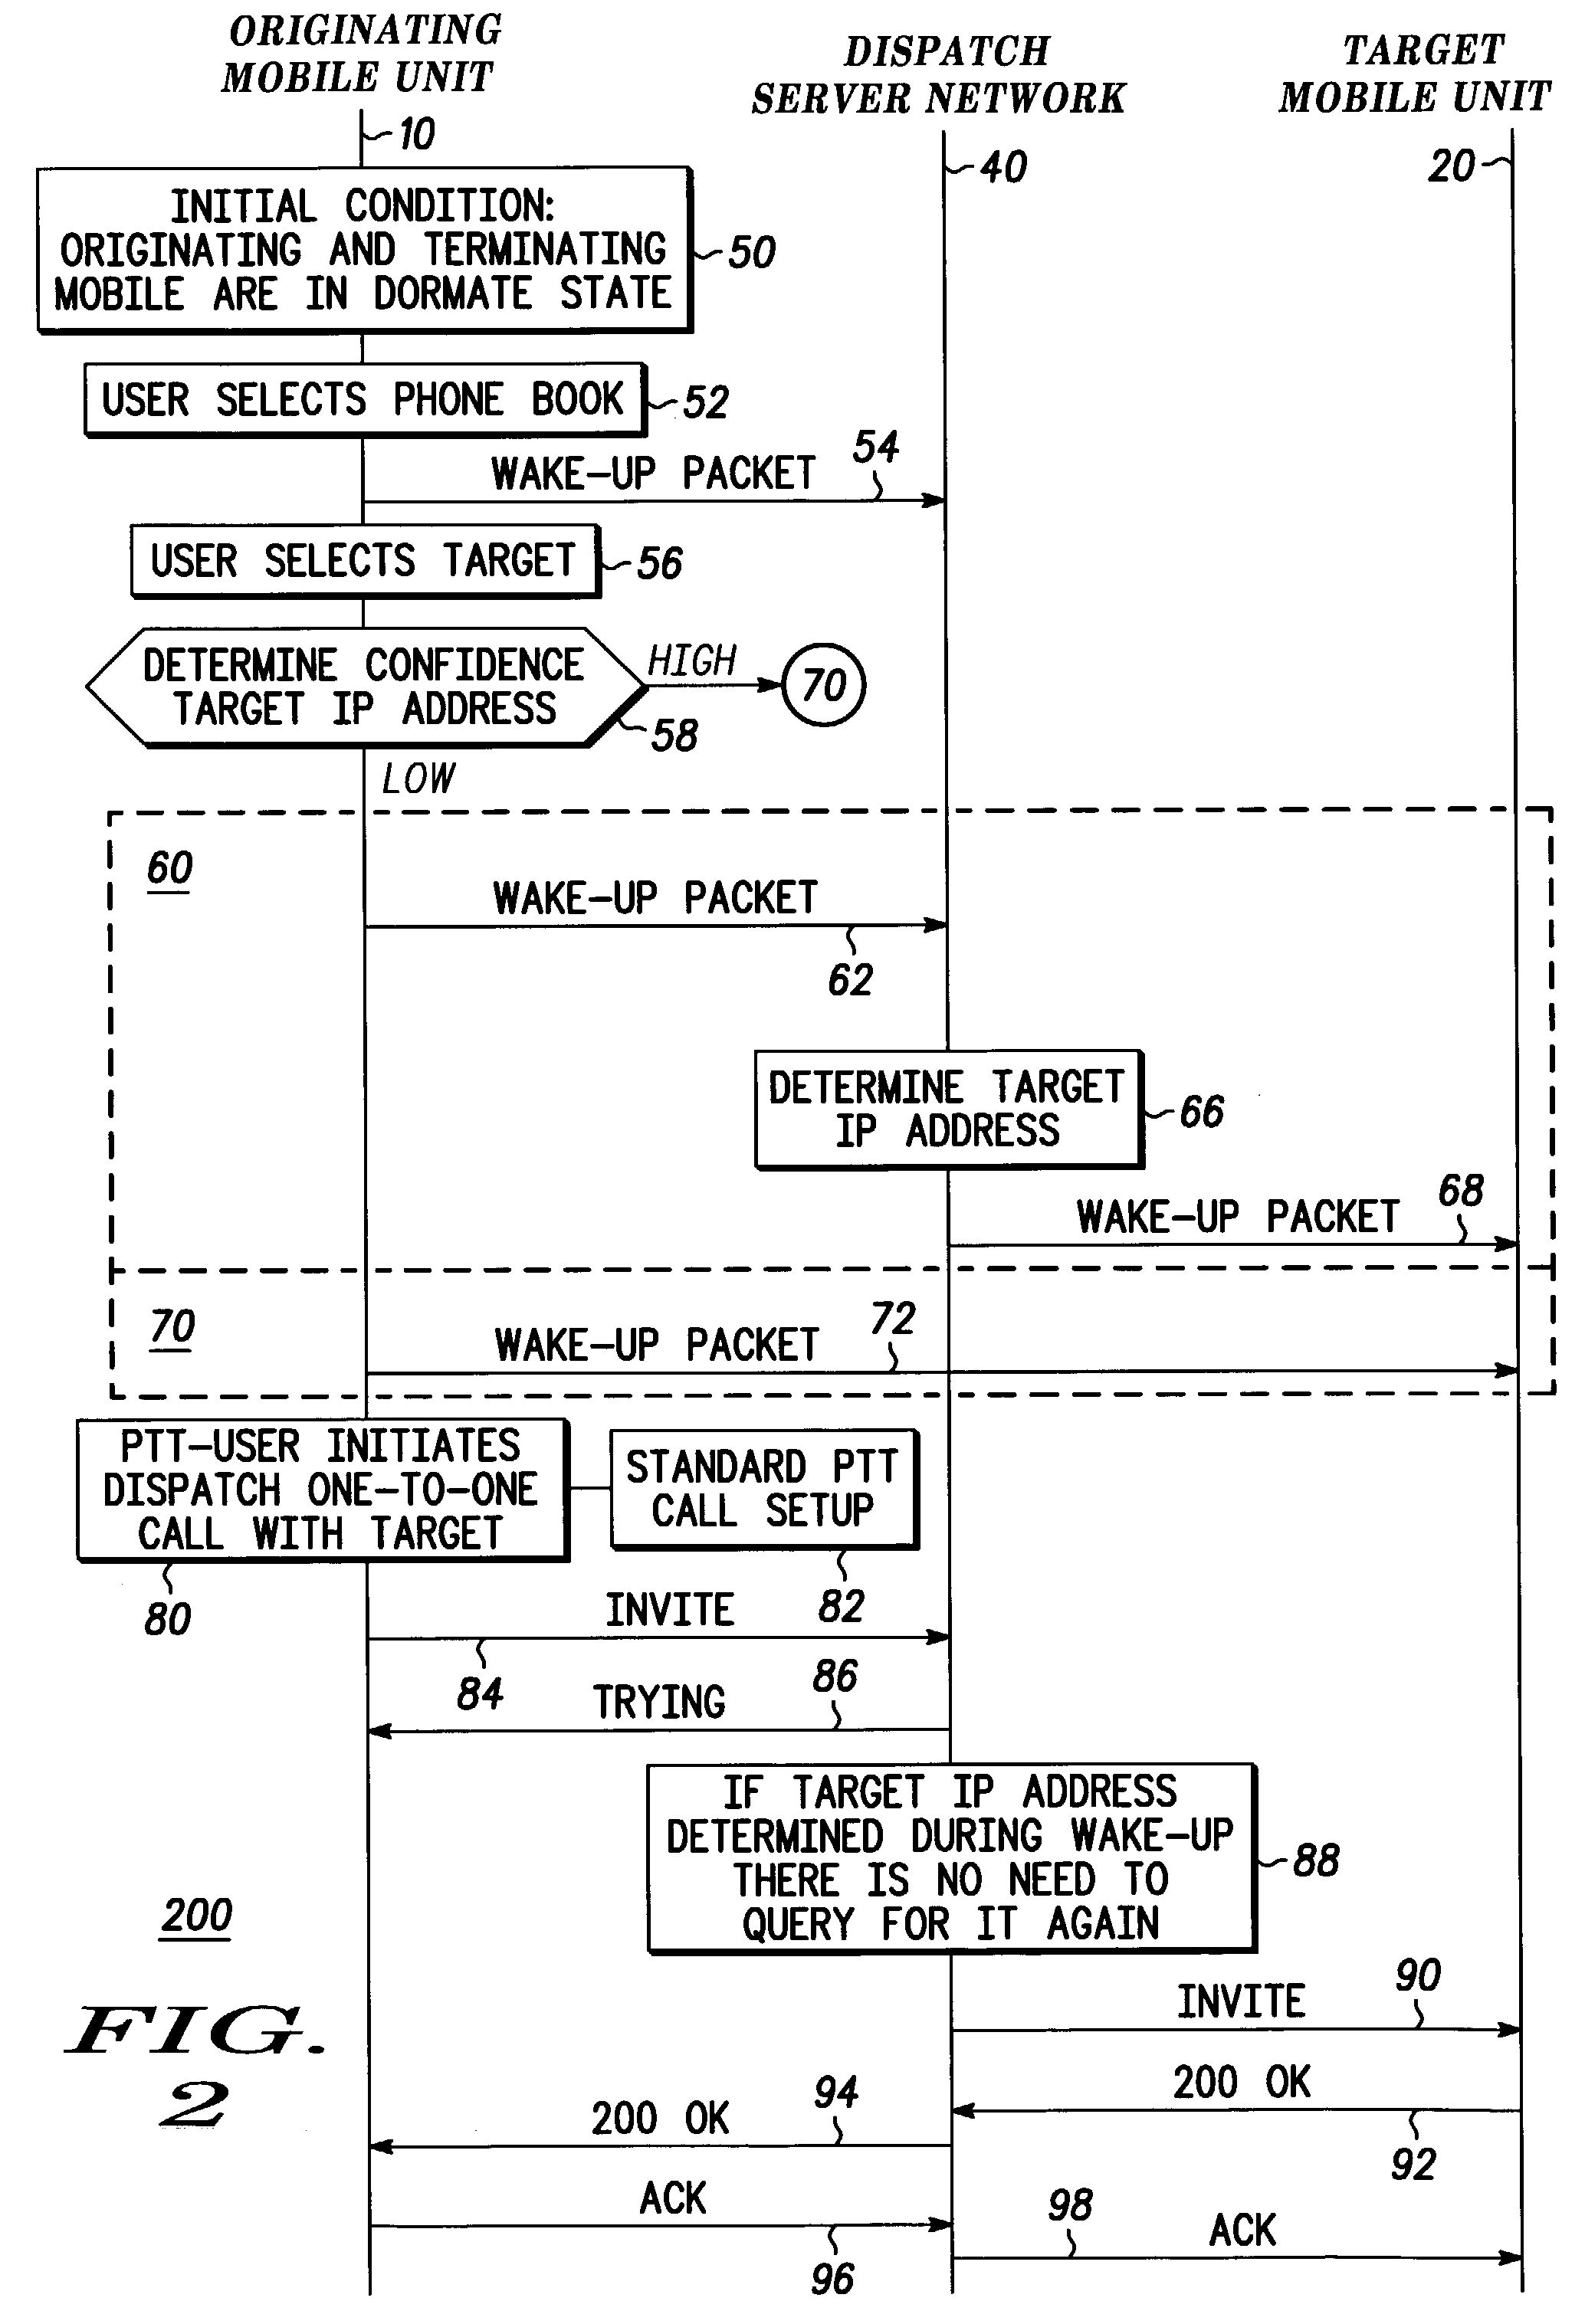 Push-to-talk call setup for a mobile packet data dispatch network